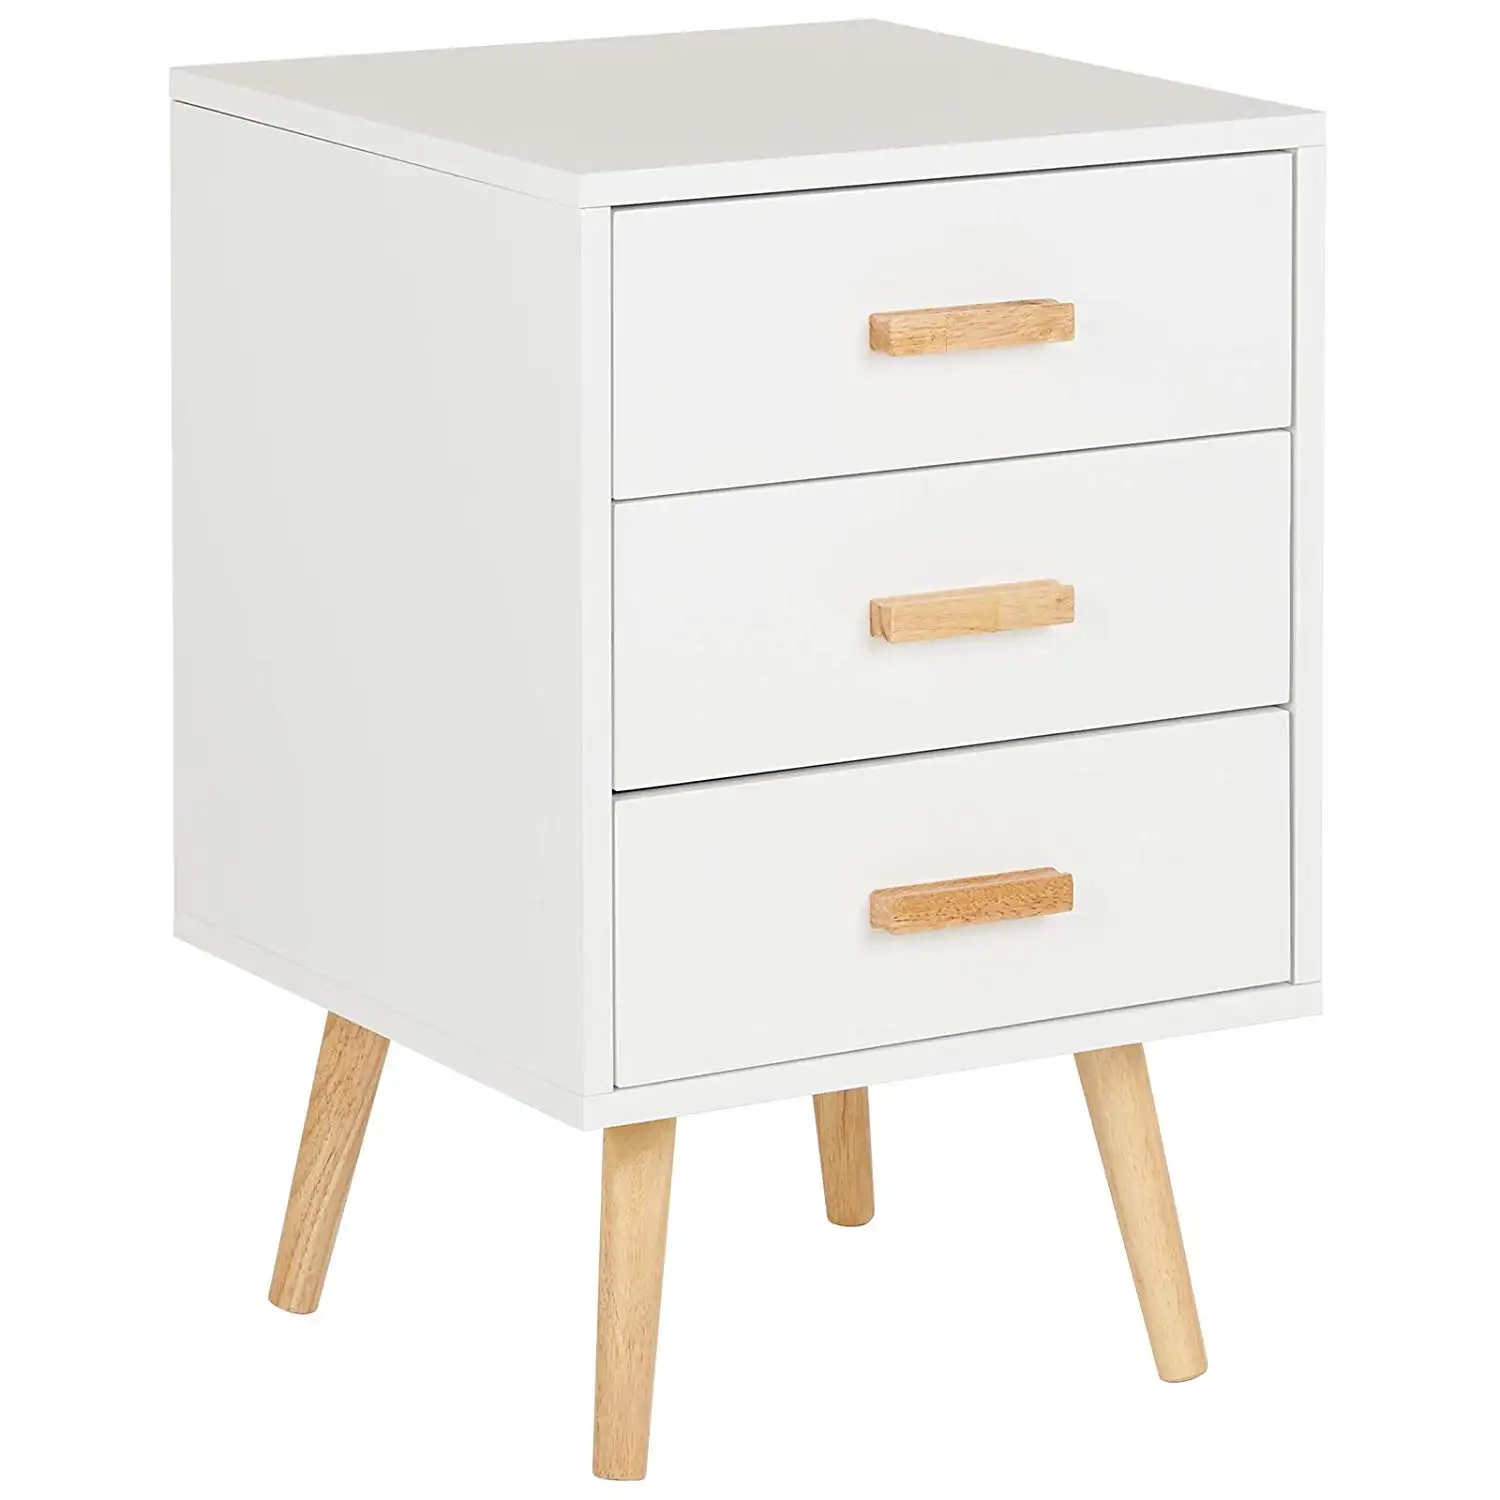 Vanimeu Furniture Scandi Style Wooden Bedside Table with Drawers and Shelf Storage Cabinet for Bedroom Oak-3 Drawers